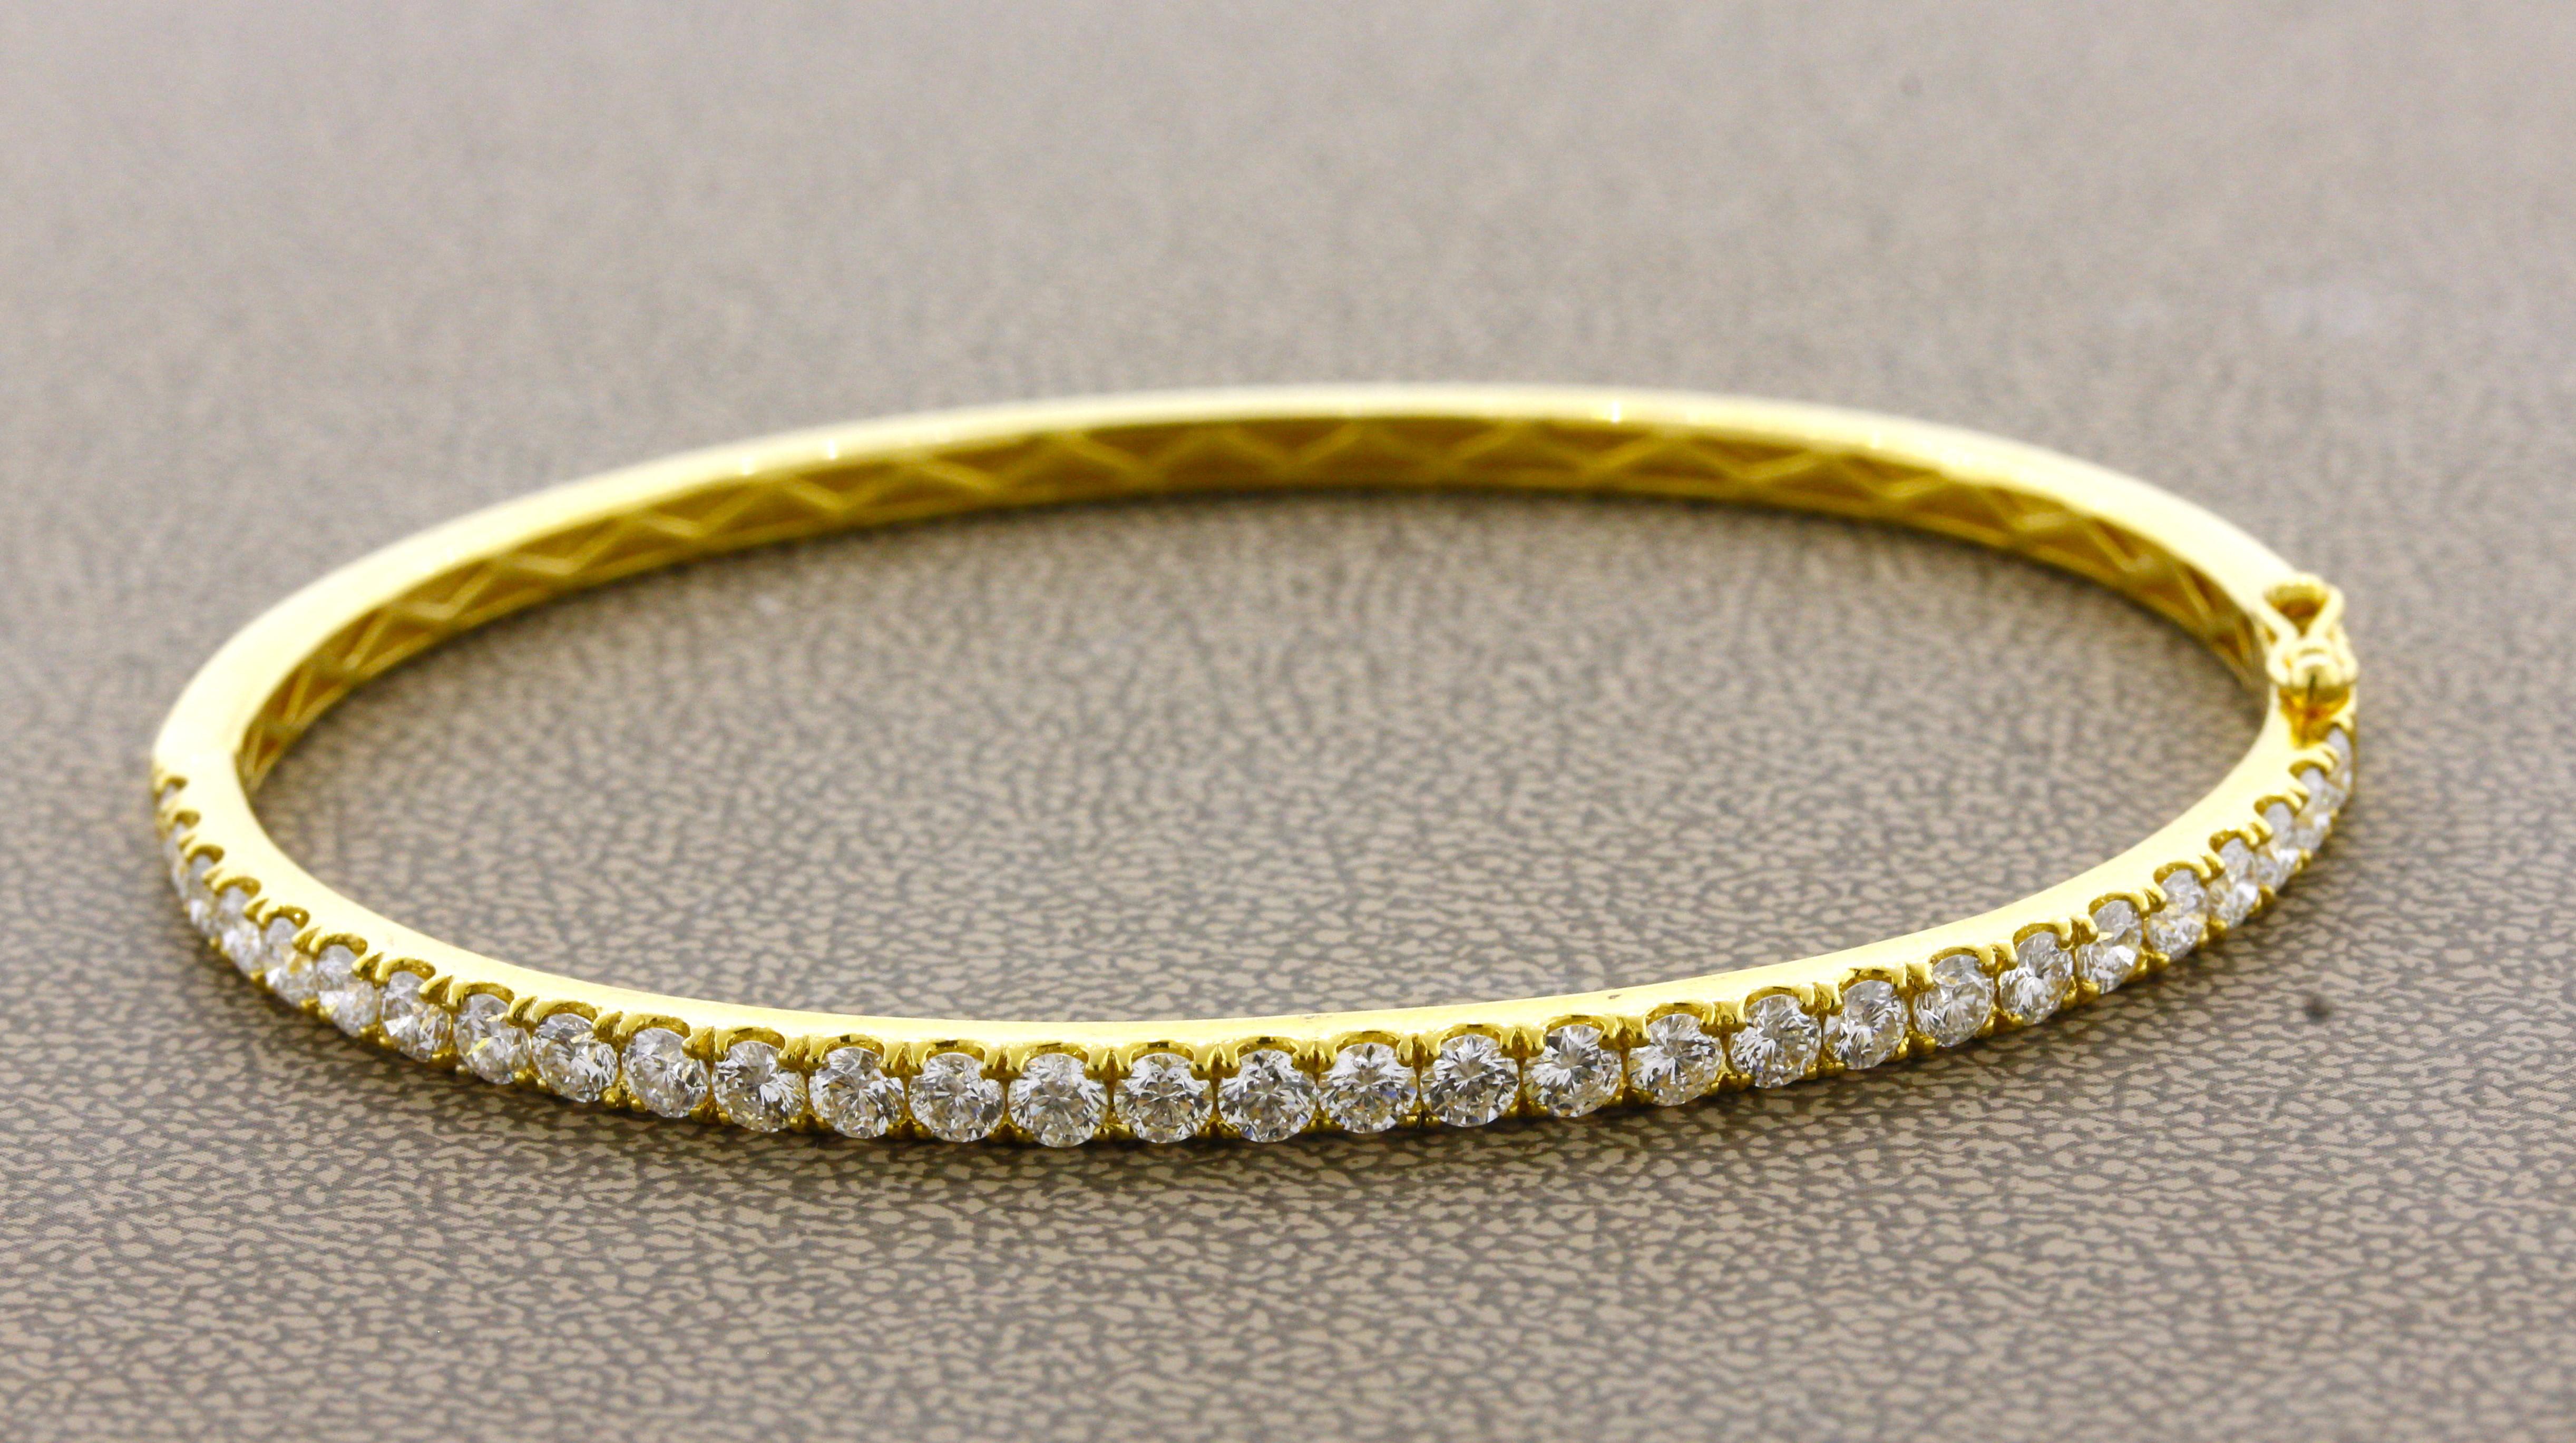 A classic and stylish bangle bracelet that can be worn daily! It features 2.50 carats of fine bright white round brilliant-cut diamonds set around half the bracelet. Made in 18k yellow gold and ready to be worn.

Circumference: 7.5 inches

Weight: